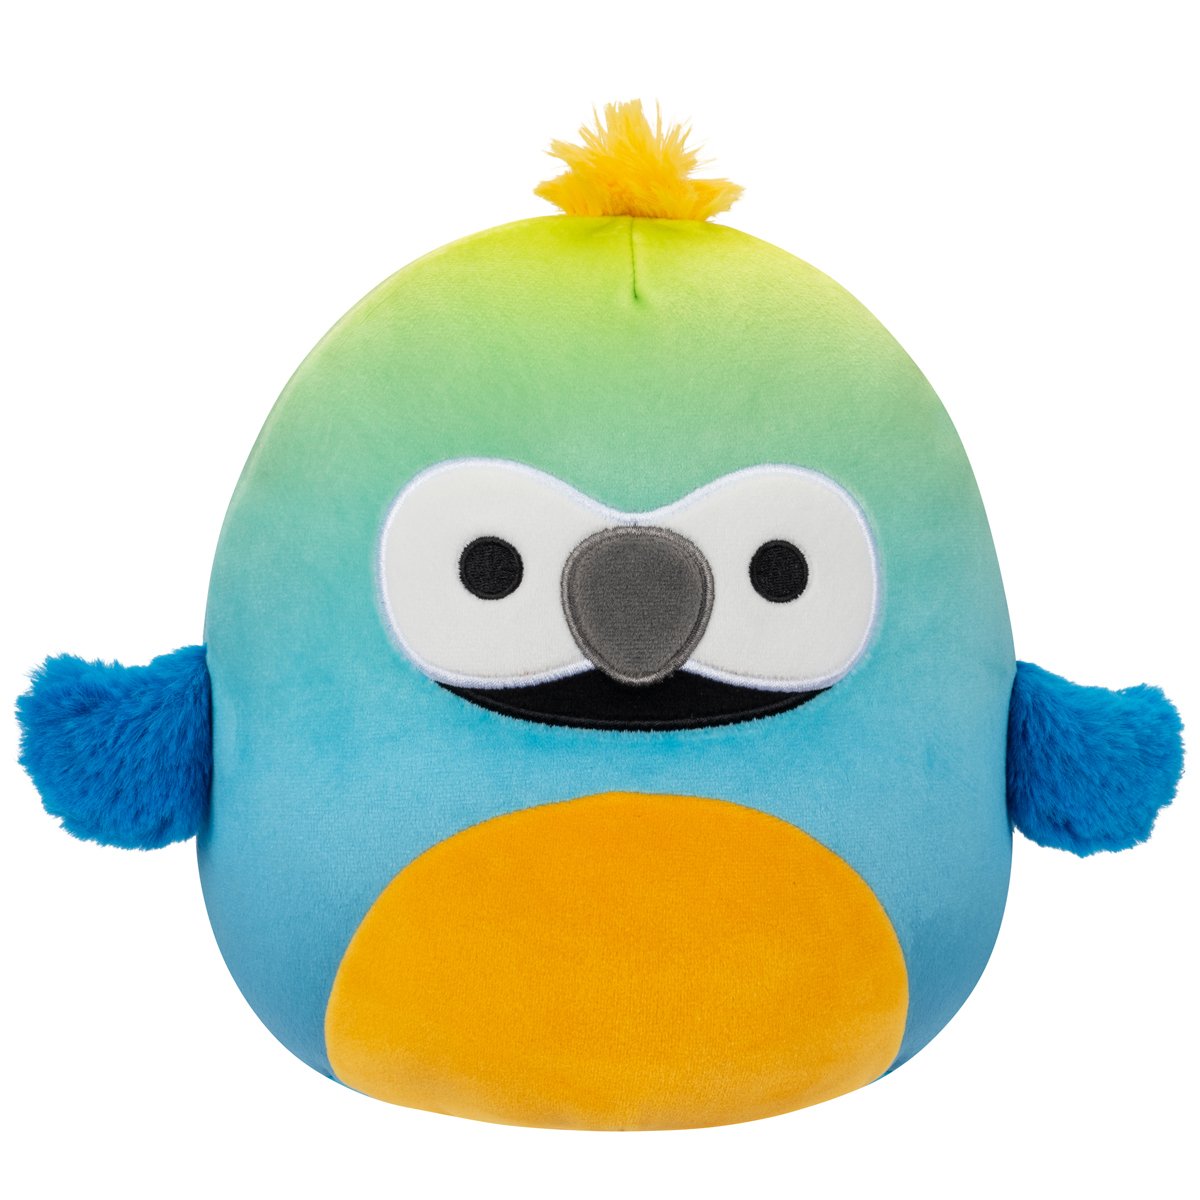 Squishmallows 7.5" Baptise the Blue & Yellow Macaw